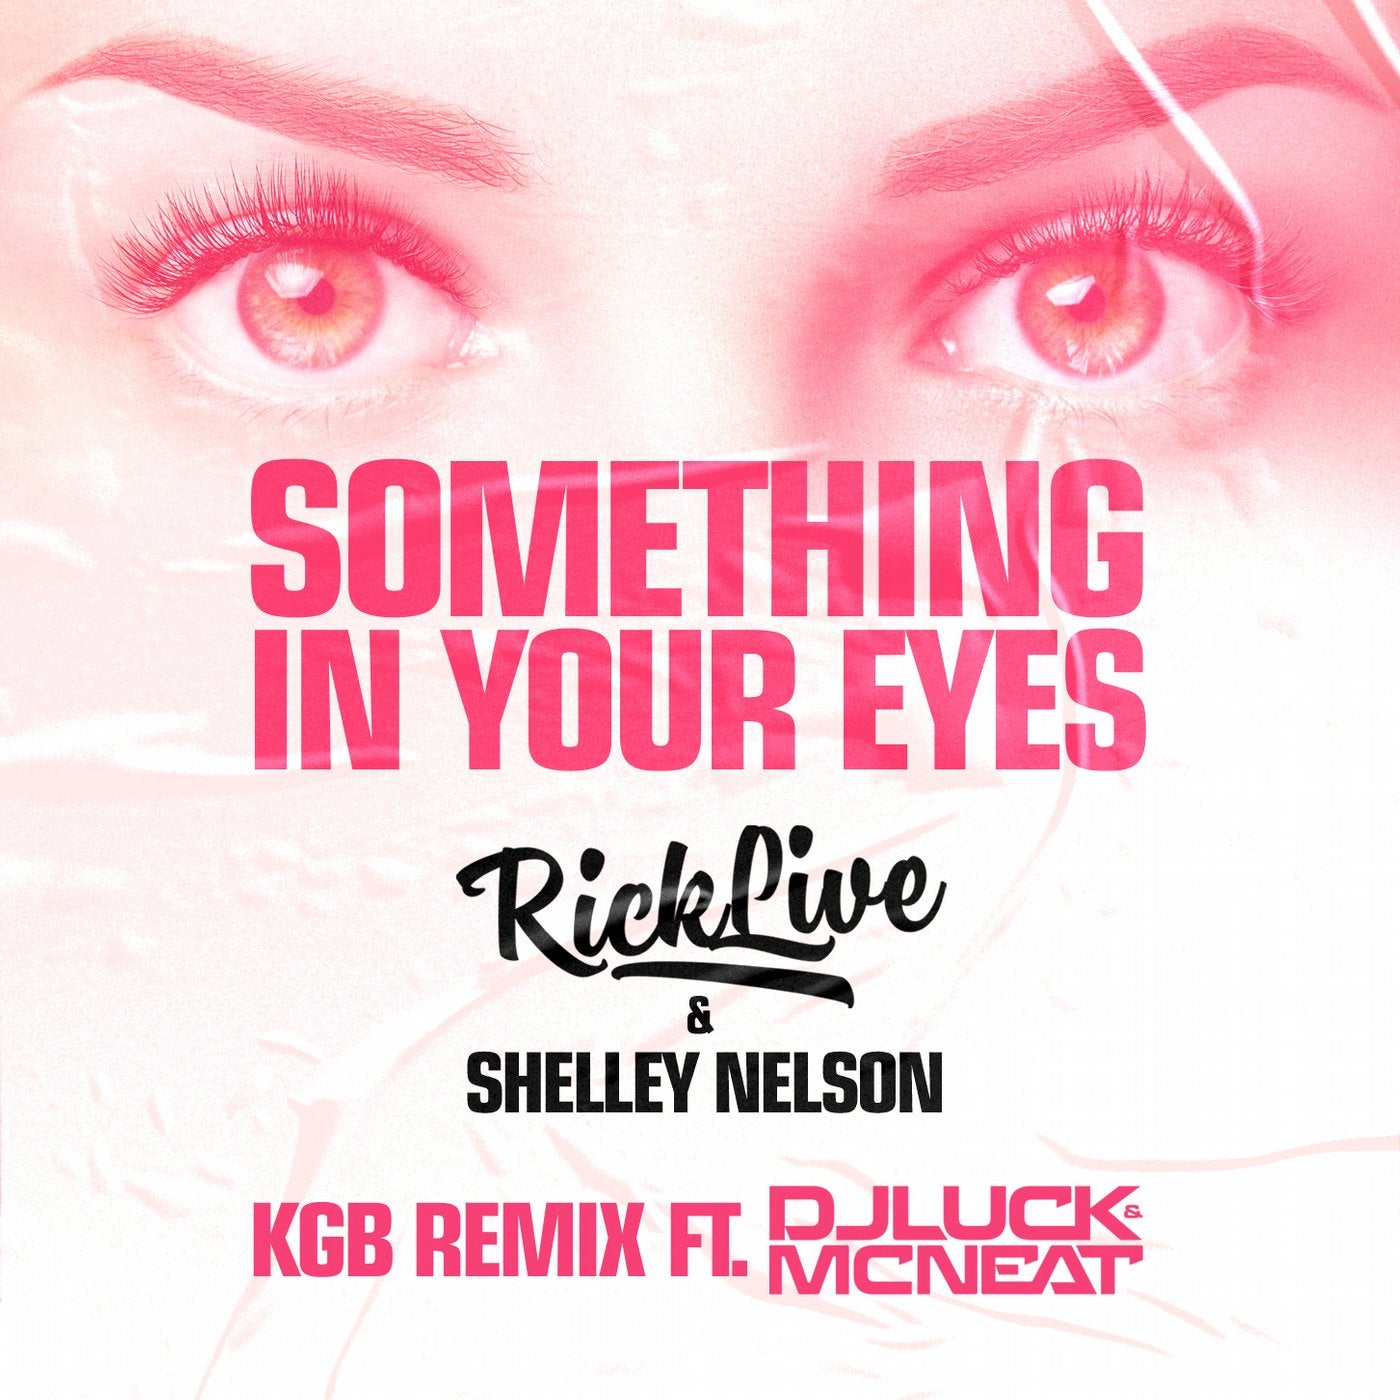 Something In Your Eyes (DJ Luck & MC Neat KGB Remix)